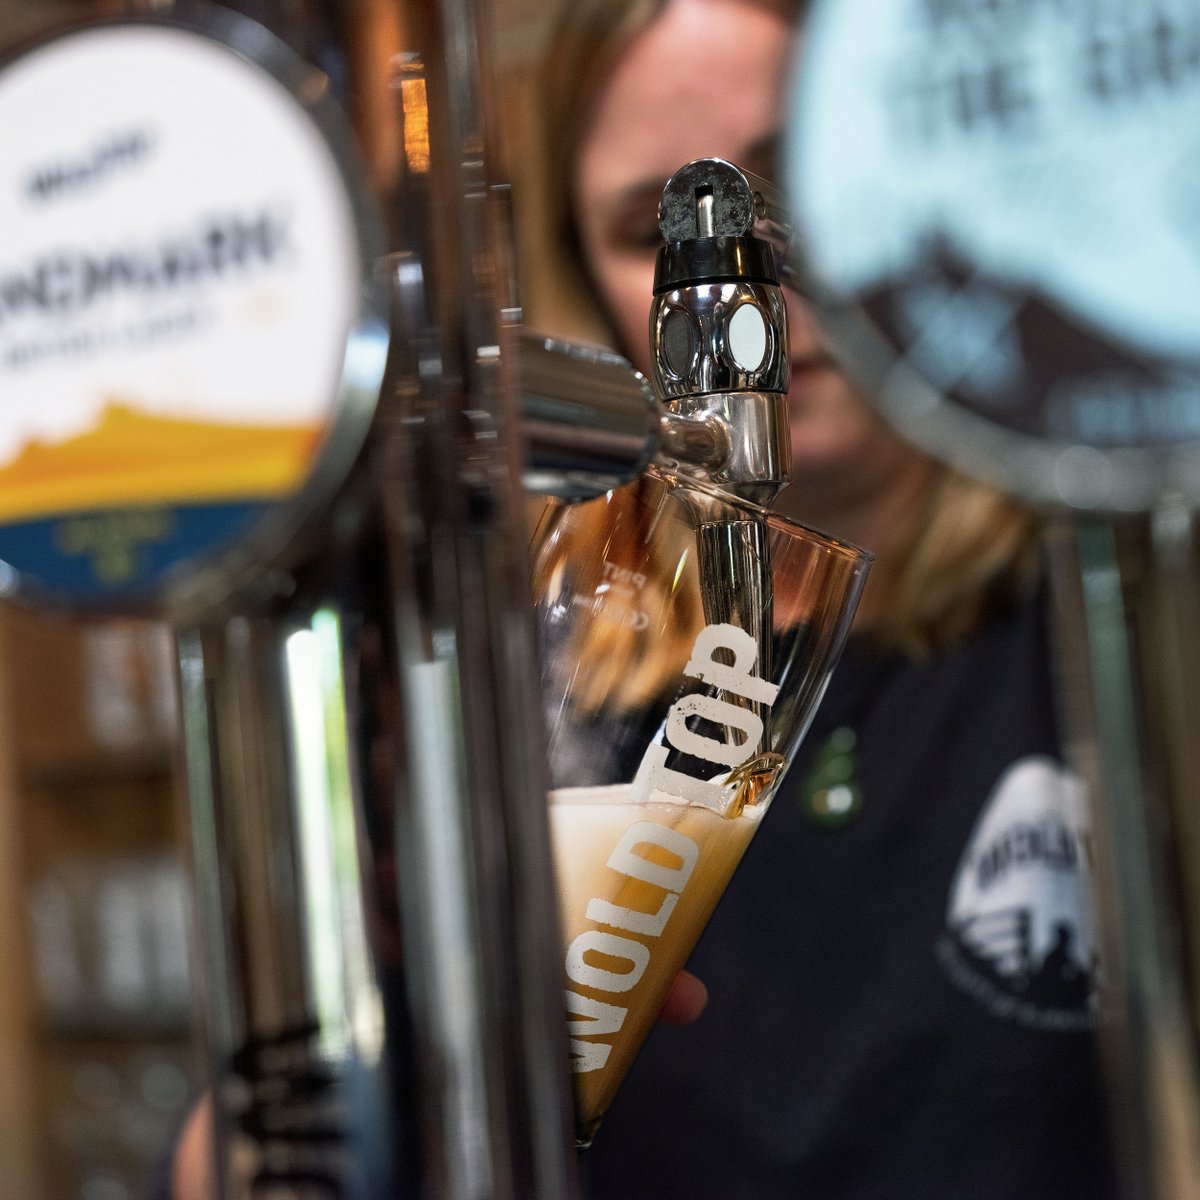 Whether you’re watching the Six Nations or just hanging out this weekend, we’d love to know what you’re pouring? A strong, full flavoured Scarborough Fair? A delicious, rich and smooth Marmalade Porter? A light and refreshing Landmark Lager? We’ve a beer for all occasions!